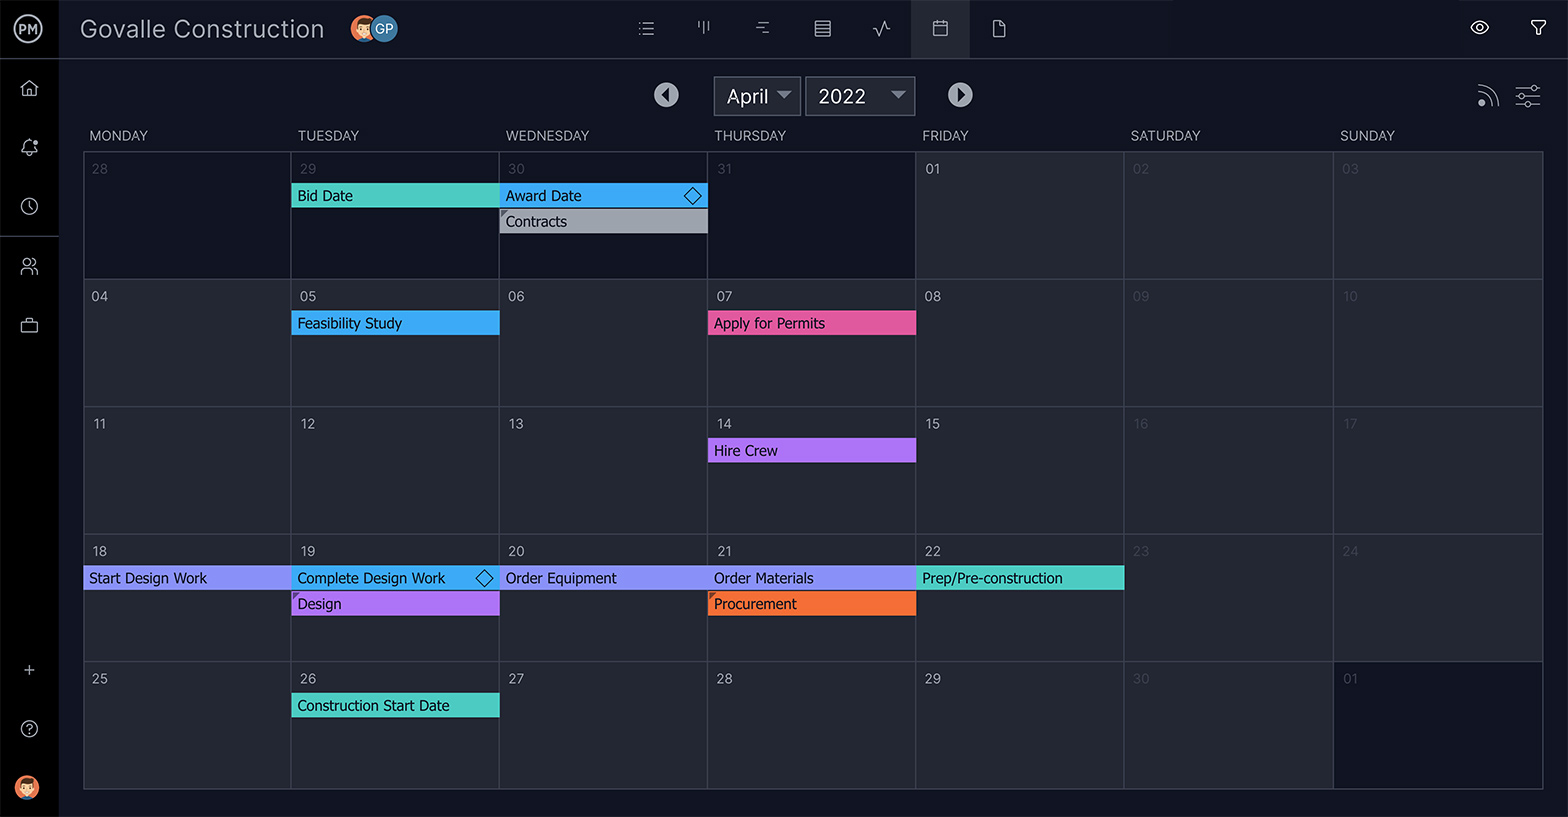 ProjectManager's calendar view allows you to manage your team